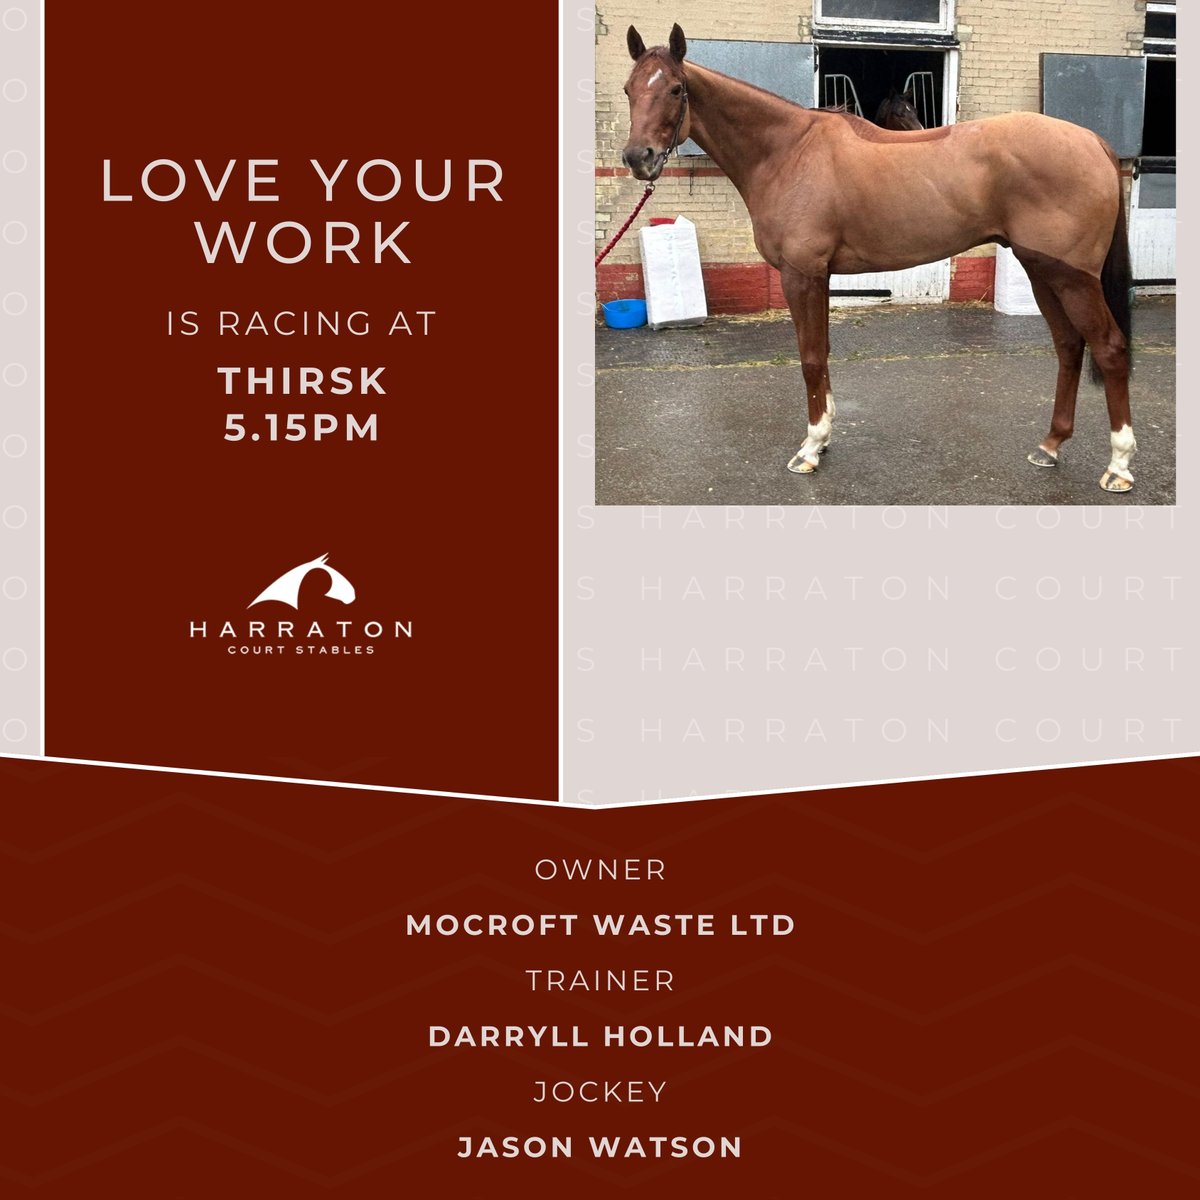 Love Your Work is ready for Thirsk 5.15! Good luck to owner Mocroft Waste Ltd, trainer #DarryllHolland and jockey @_JasonWatson 🍀 #LoveYourWork